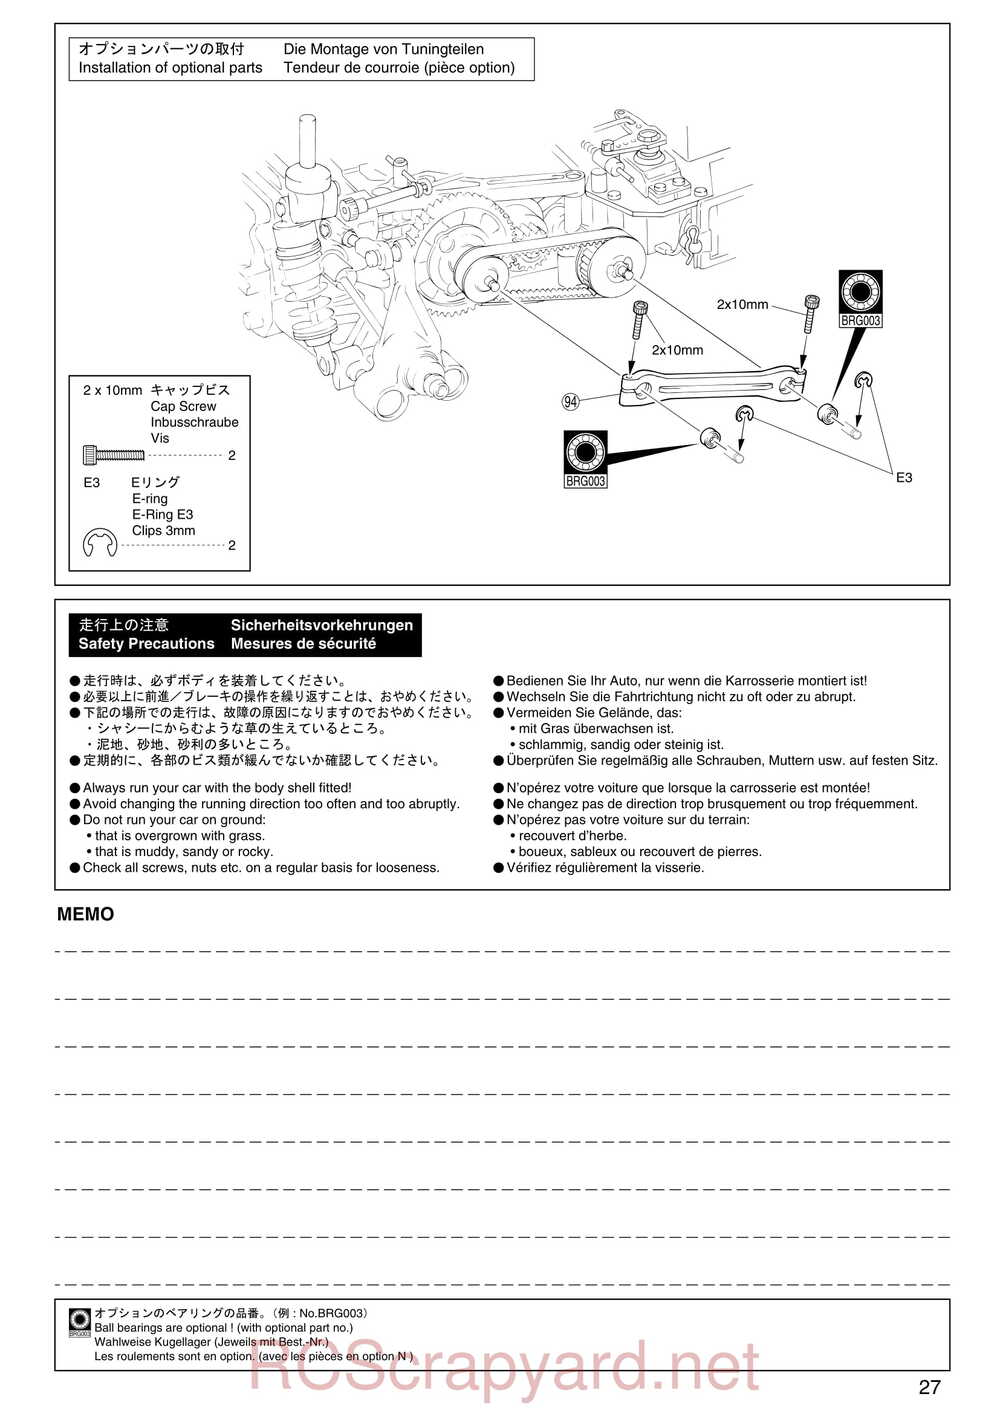 Kyosho - 31122 - V-One S2 - Manual - Page 27